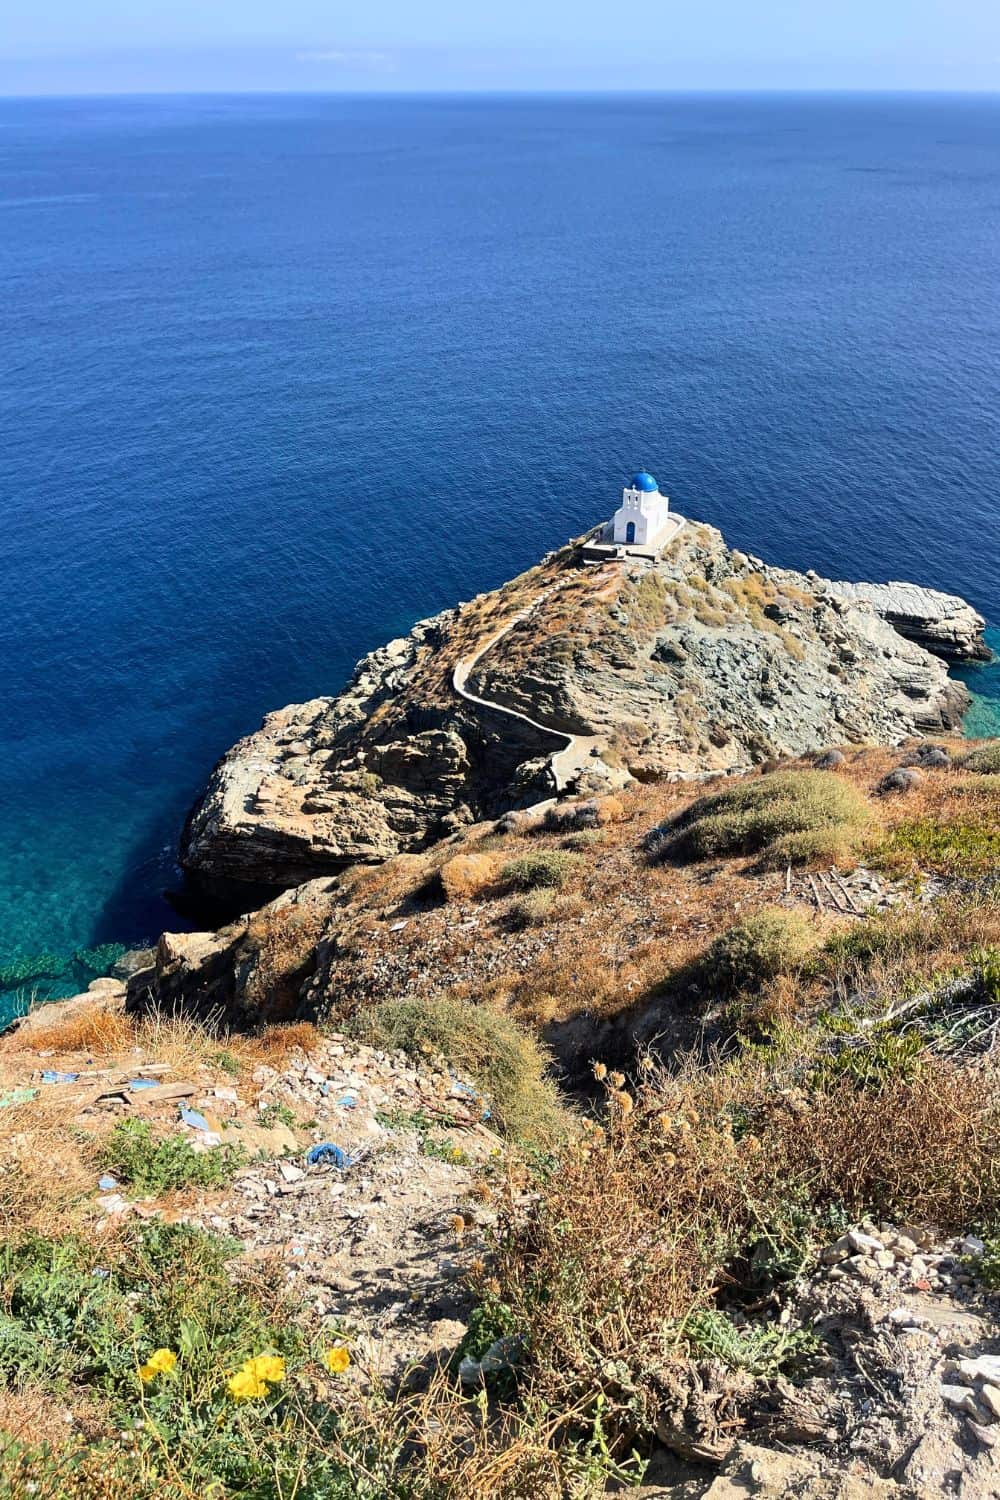 A traditional white chapel with a vivid blue dome stands alone on a rocky outcrop in Sifnos, overlooking the deep blue sea. A narrow path meanders towards it, promising a peaceful retreat amid the wild, natural beauty of the island's coastline.